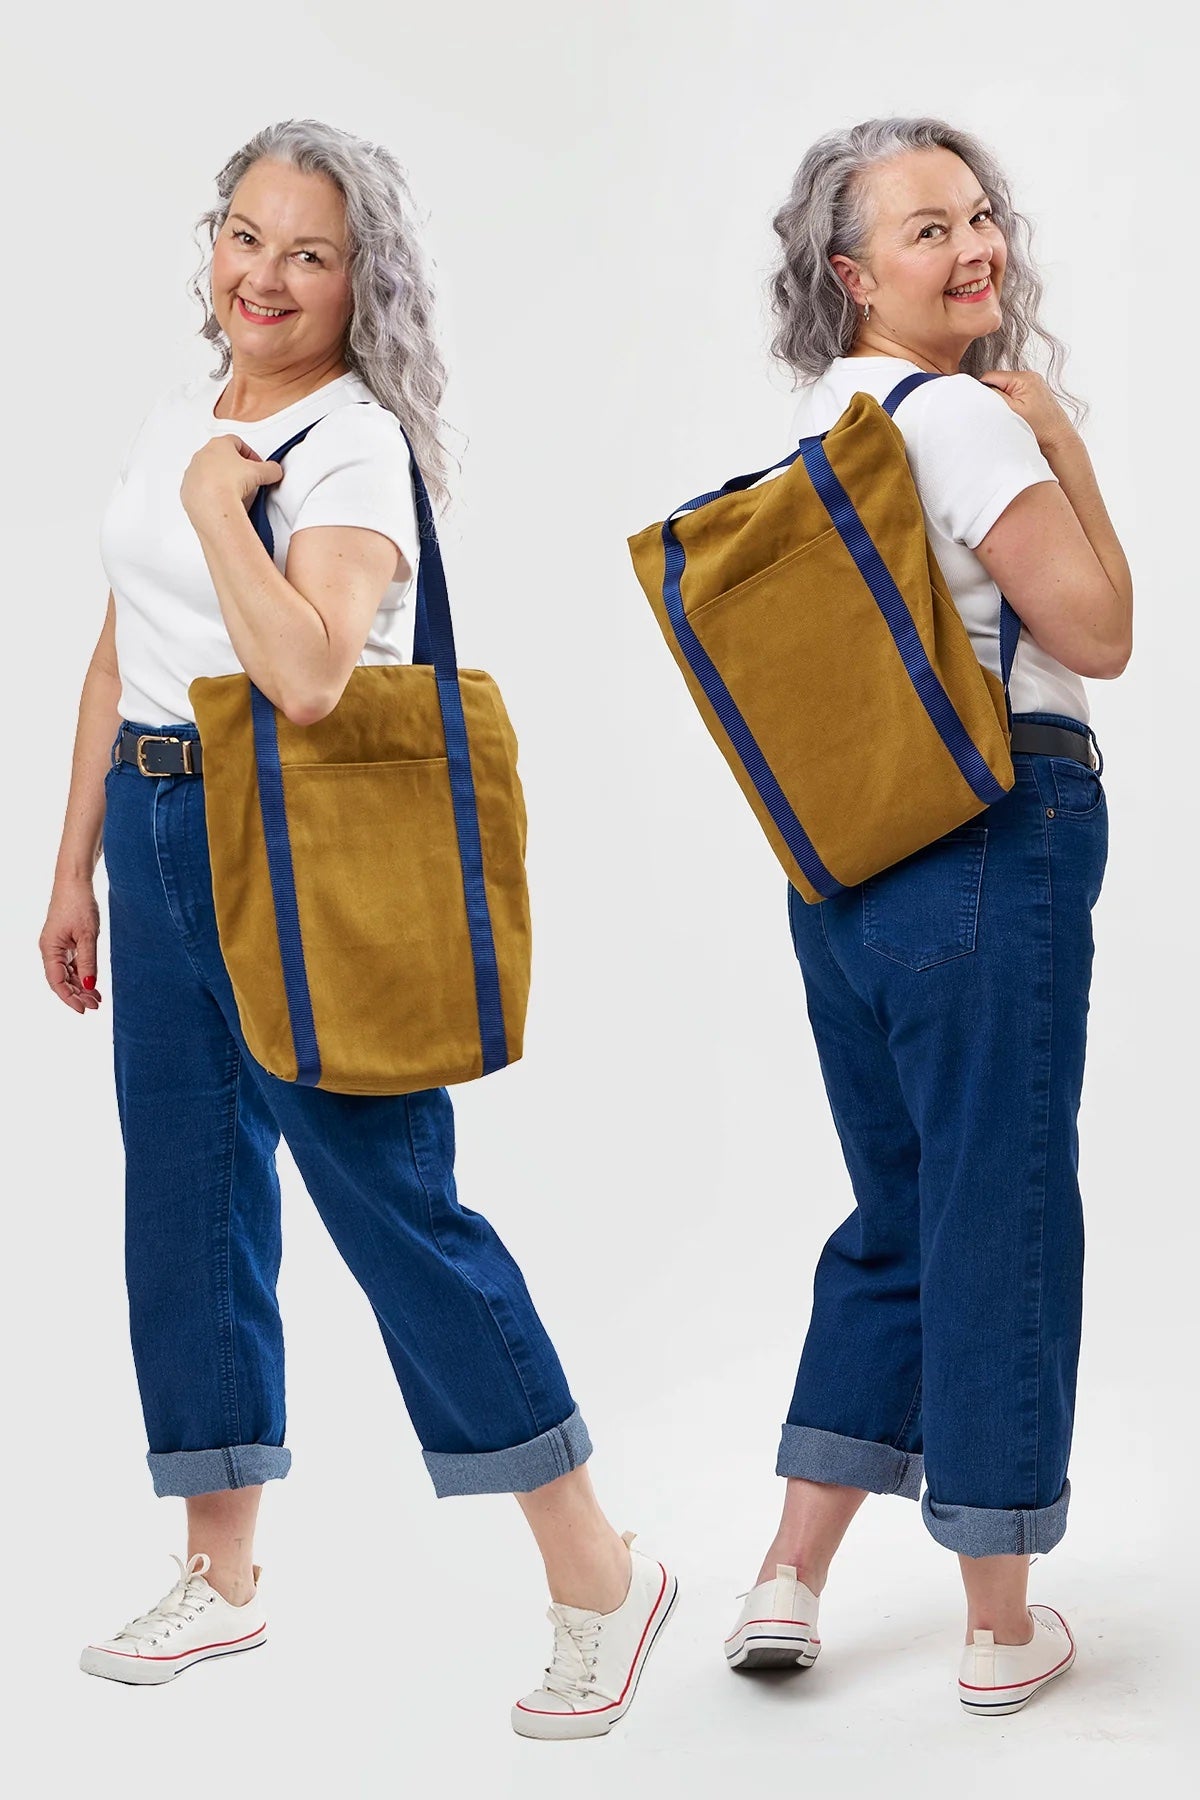 Woman wearing the Totepack sewing pattern from Sew Over It on The Fold Line. A bag pattern made in cotton twill, cotton canvas, or denim fabric, featuring a full lining, zip top closure, outside pocket, and convertible straps.